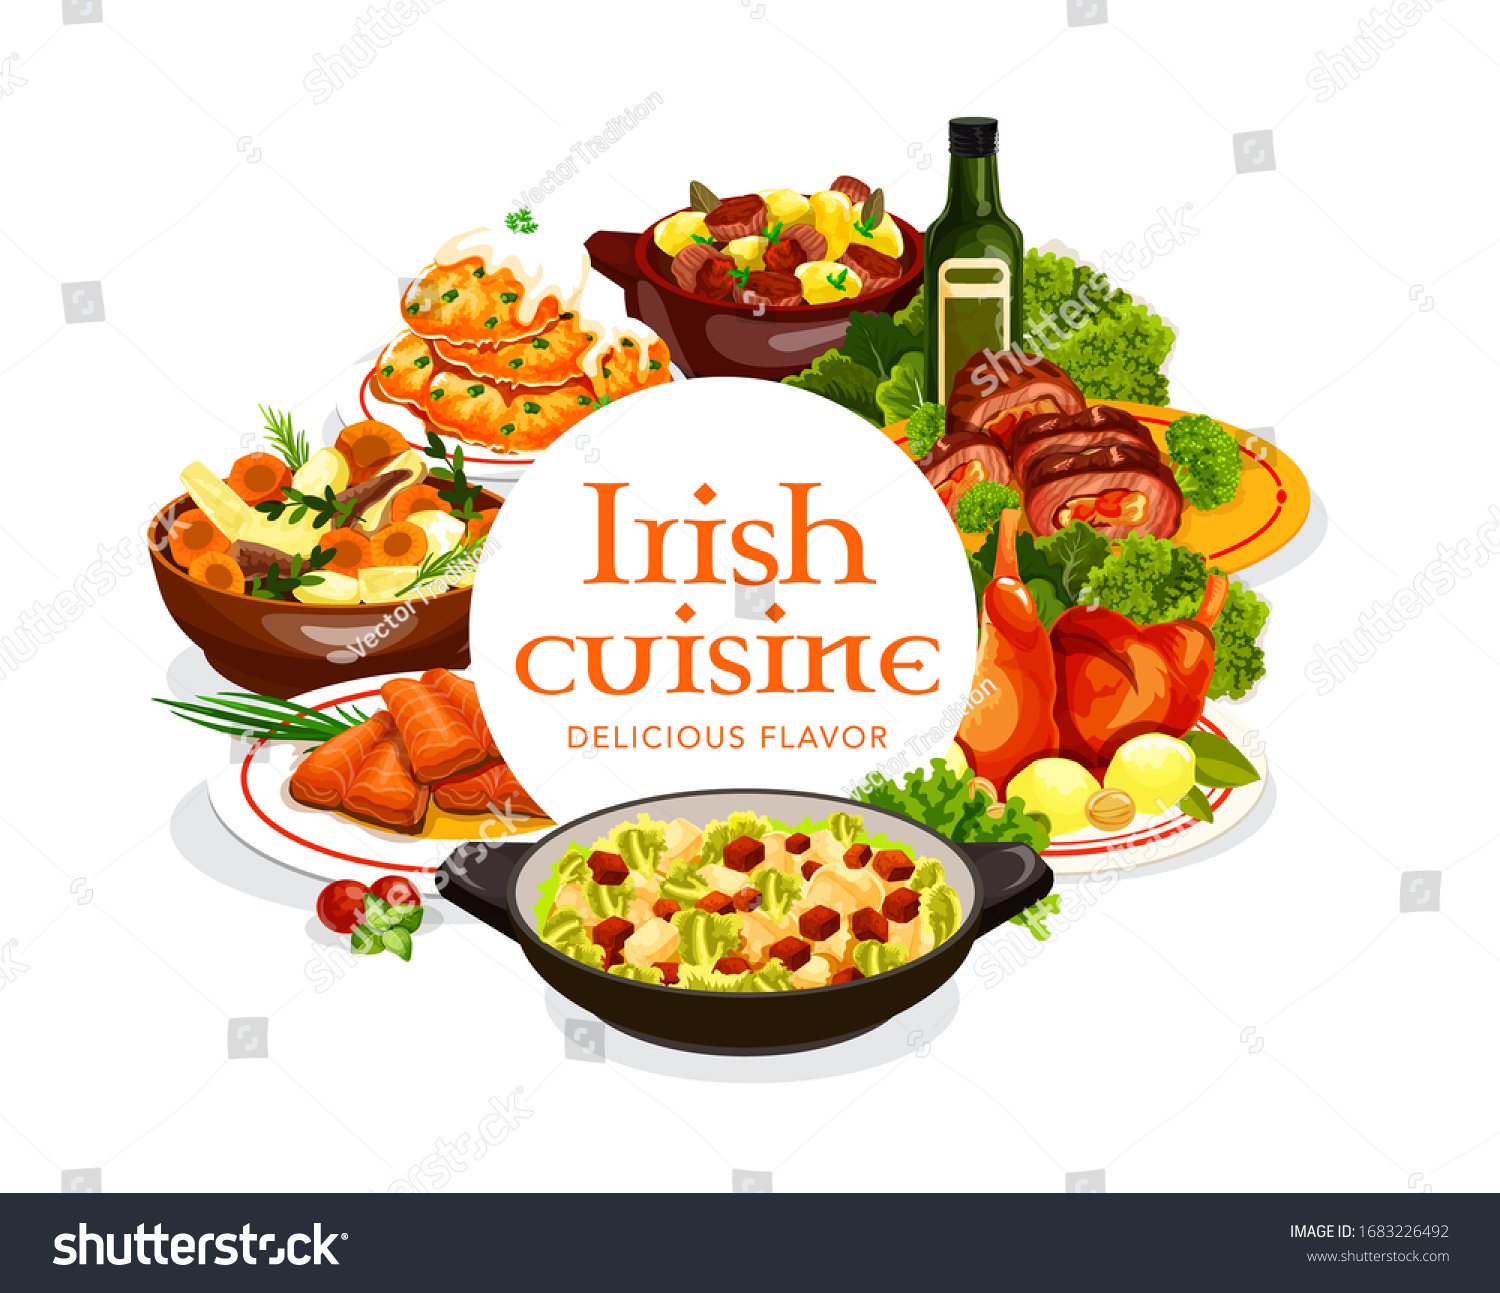 SVG of Irish cuisine meat and fish dishes with vegetables, vector food. Irish stew, baked beef rolls and rabbit, potato pancakes and red cabbage salad with grilled salmon and colcannon with spices and herbs svg